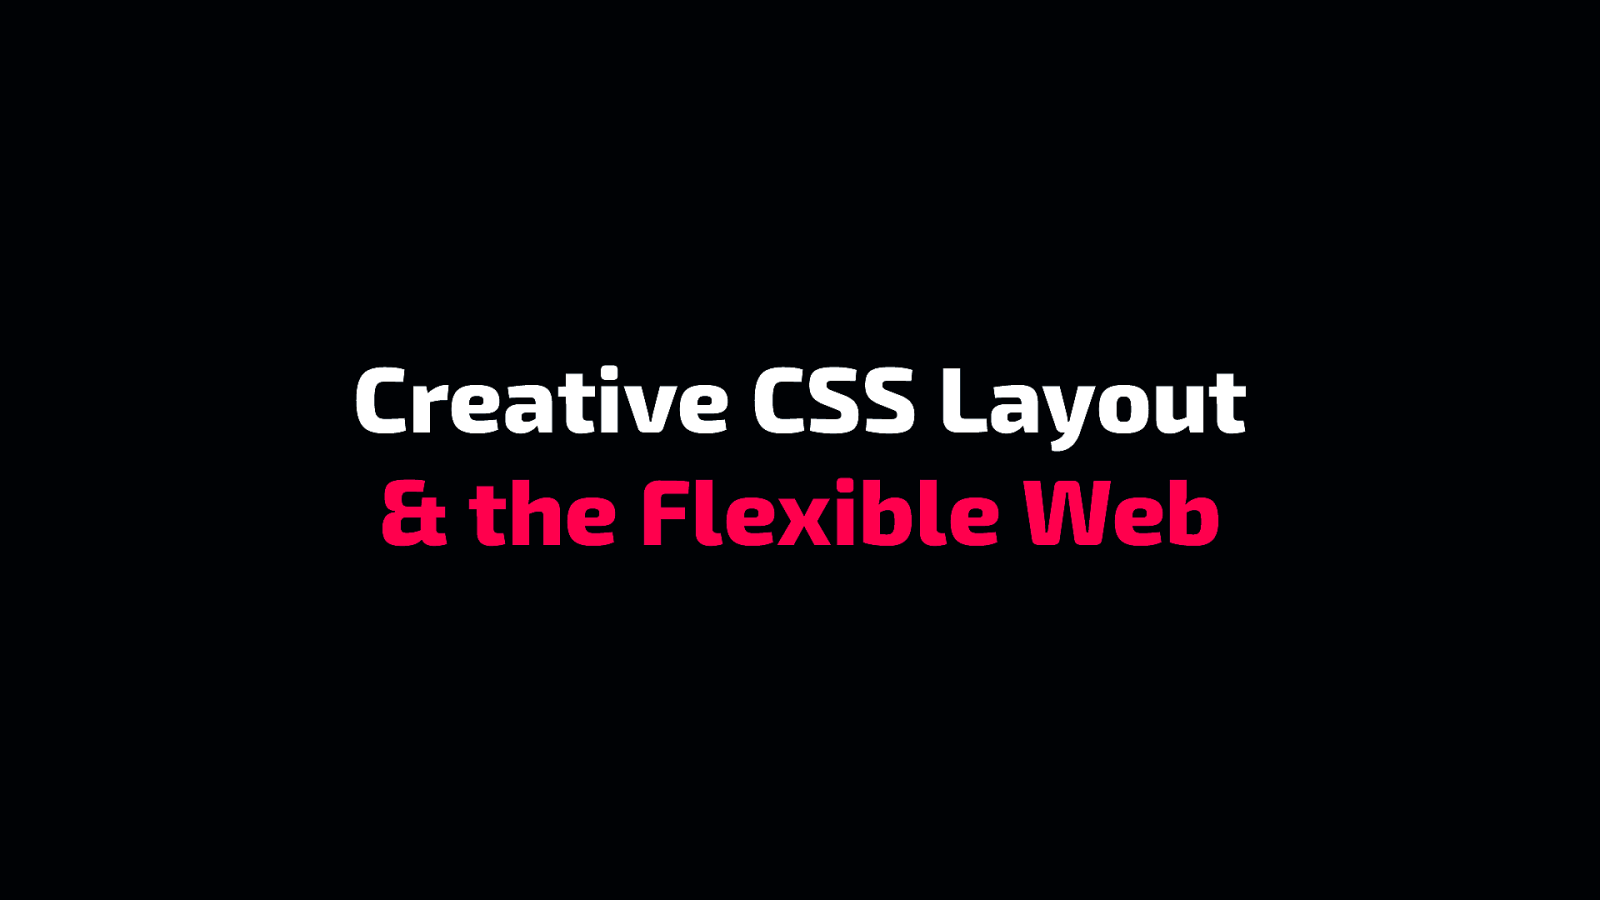 Creative CSS Layout & the Flexible Web